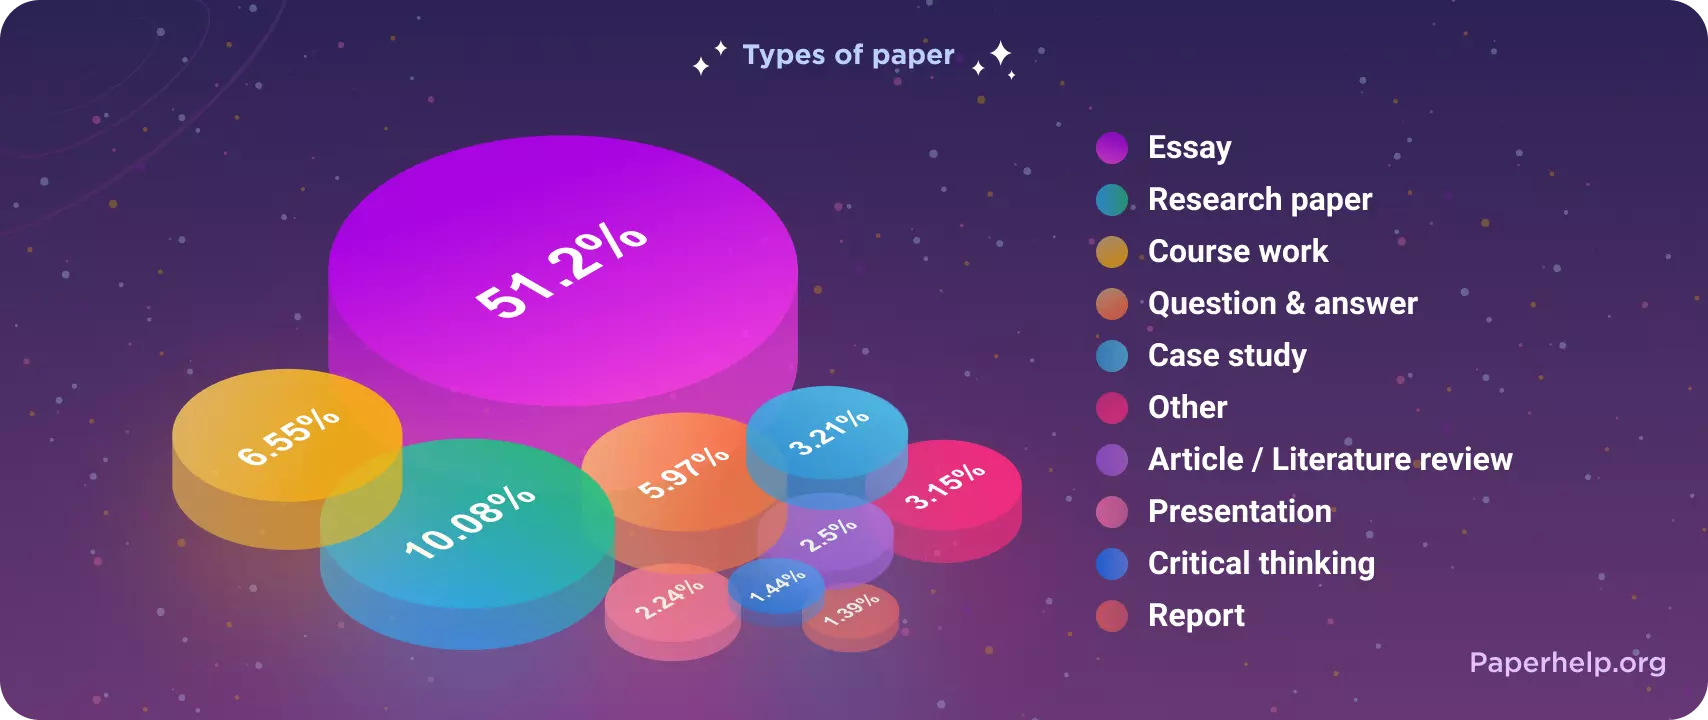 types of paper